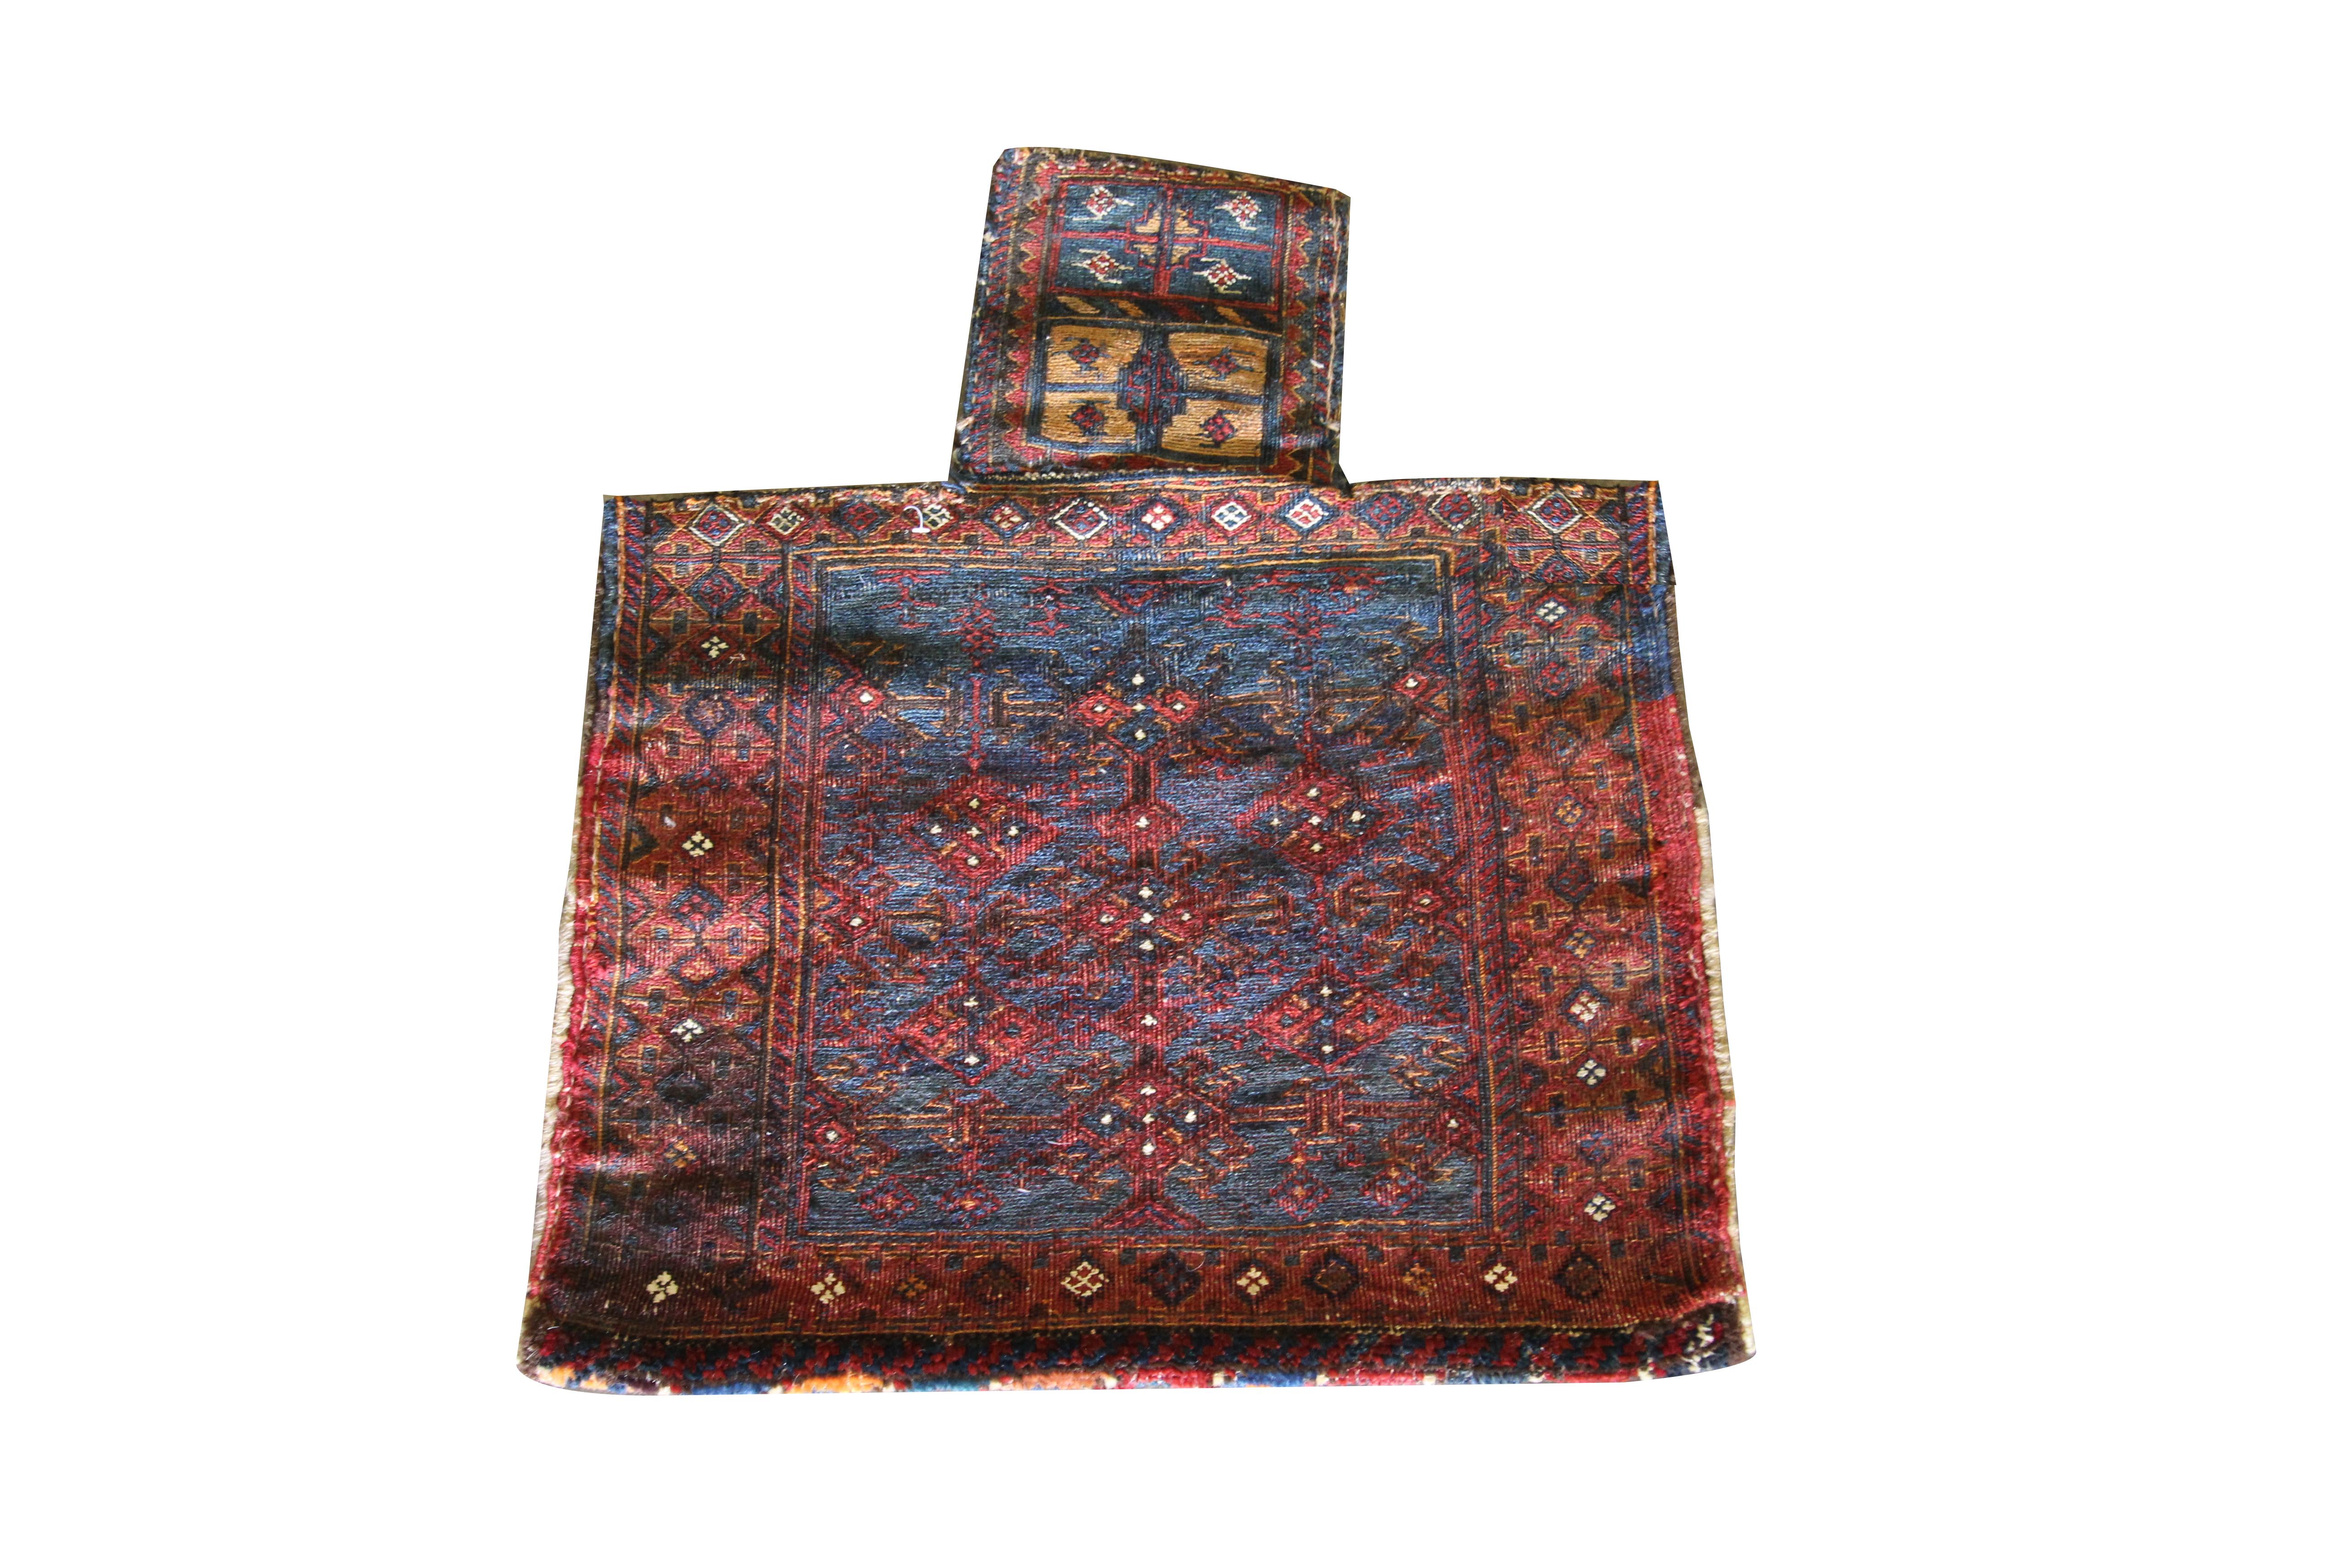 Rare Collectable Salt Bag Handwoven Oriental Red Blue Wool Rug